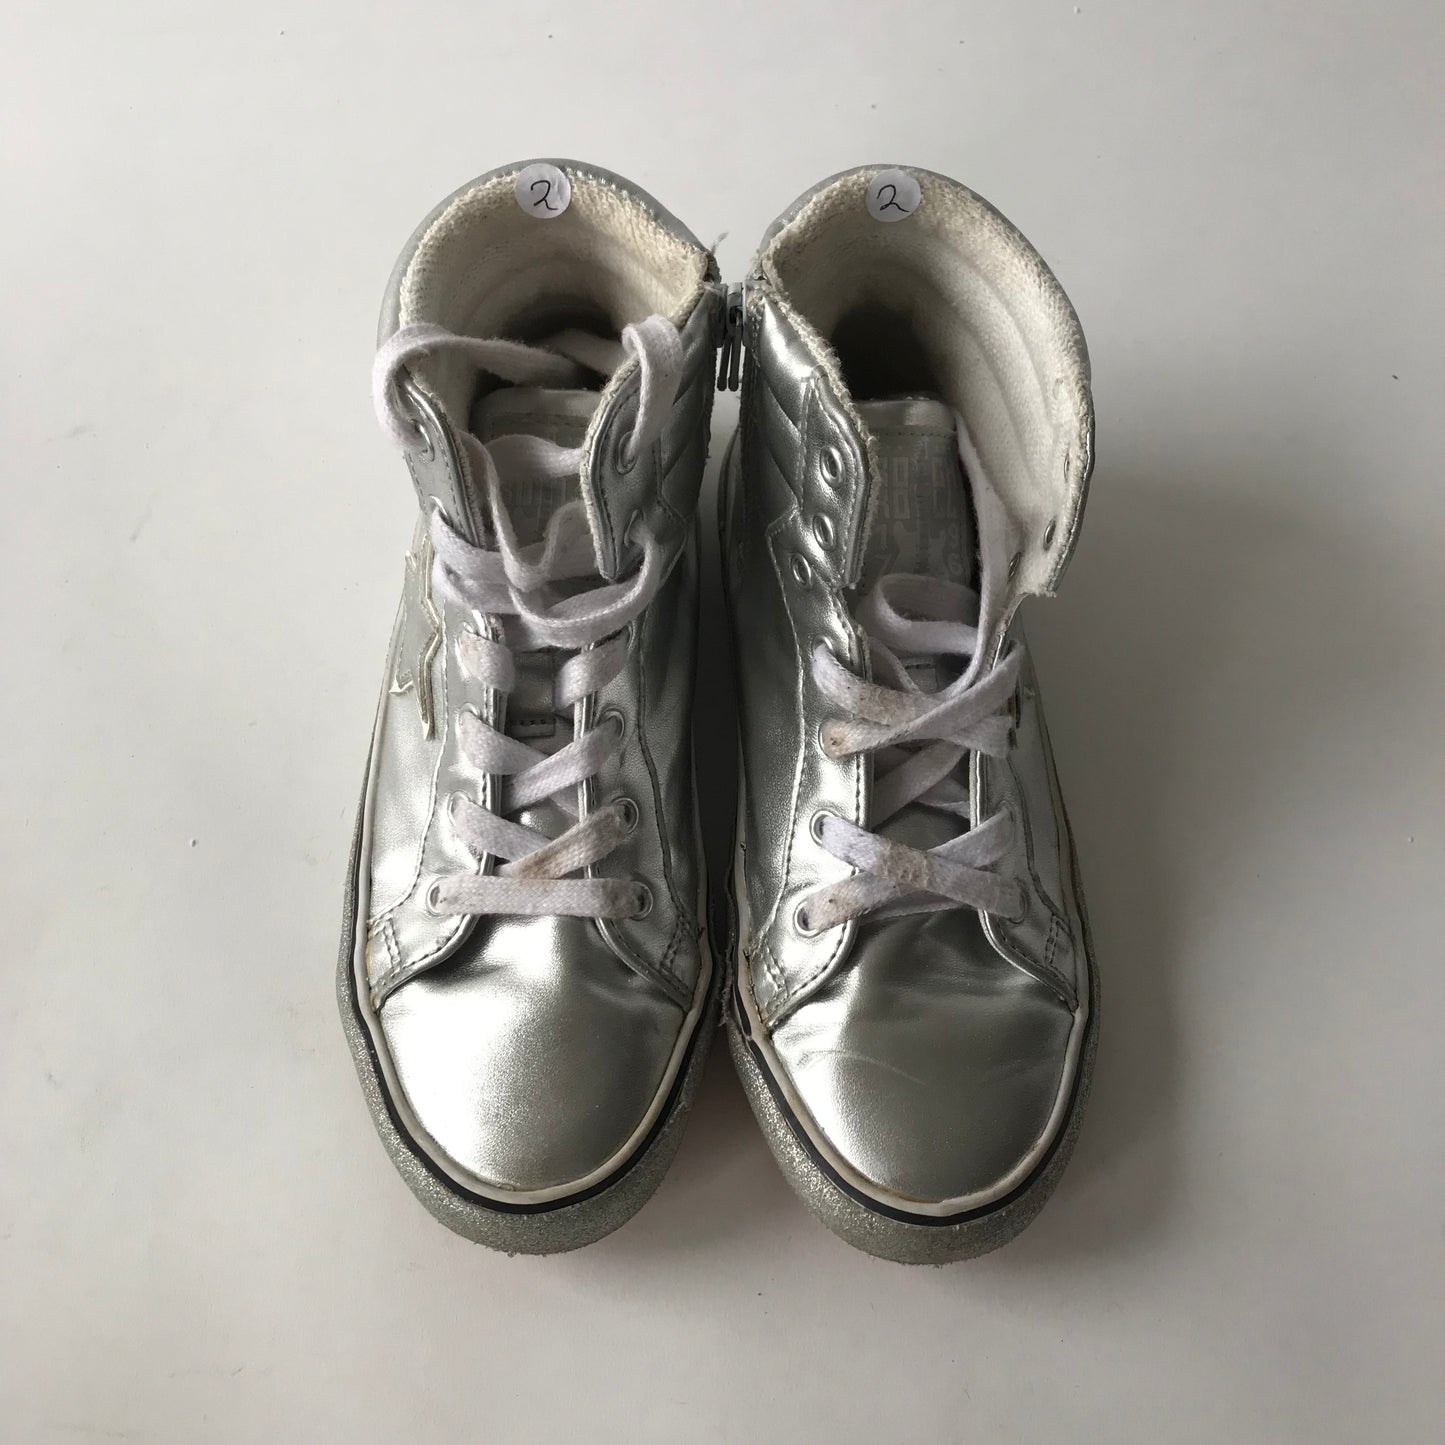 Silver High Tops Trainers Shoe Size 2